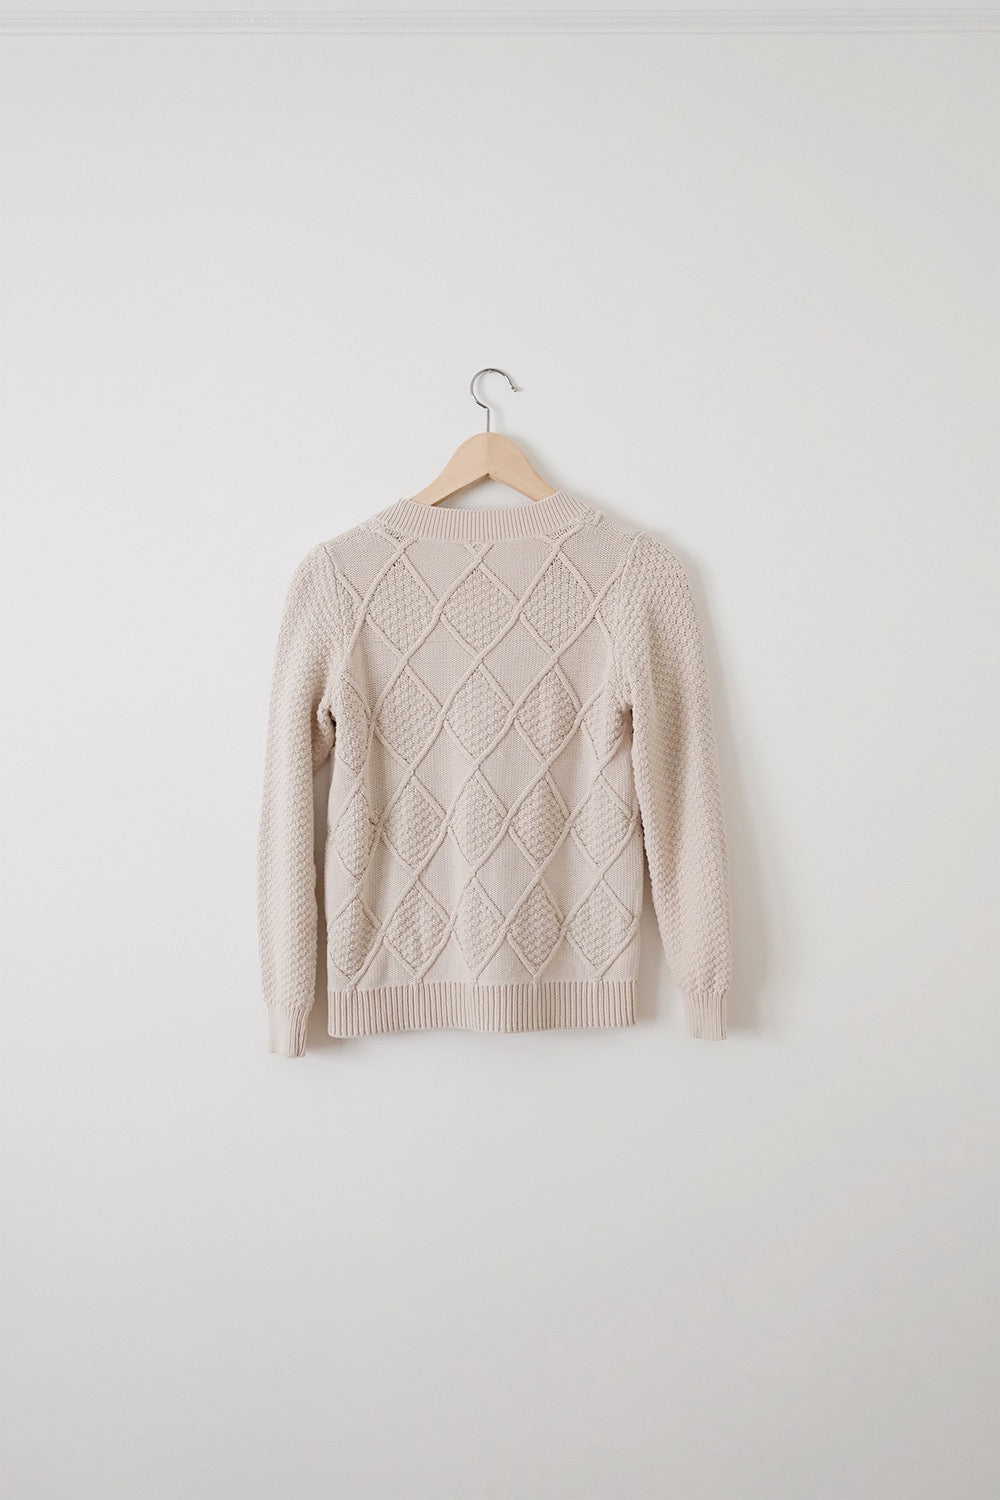 urban outfitters knit fisherman cardigan